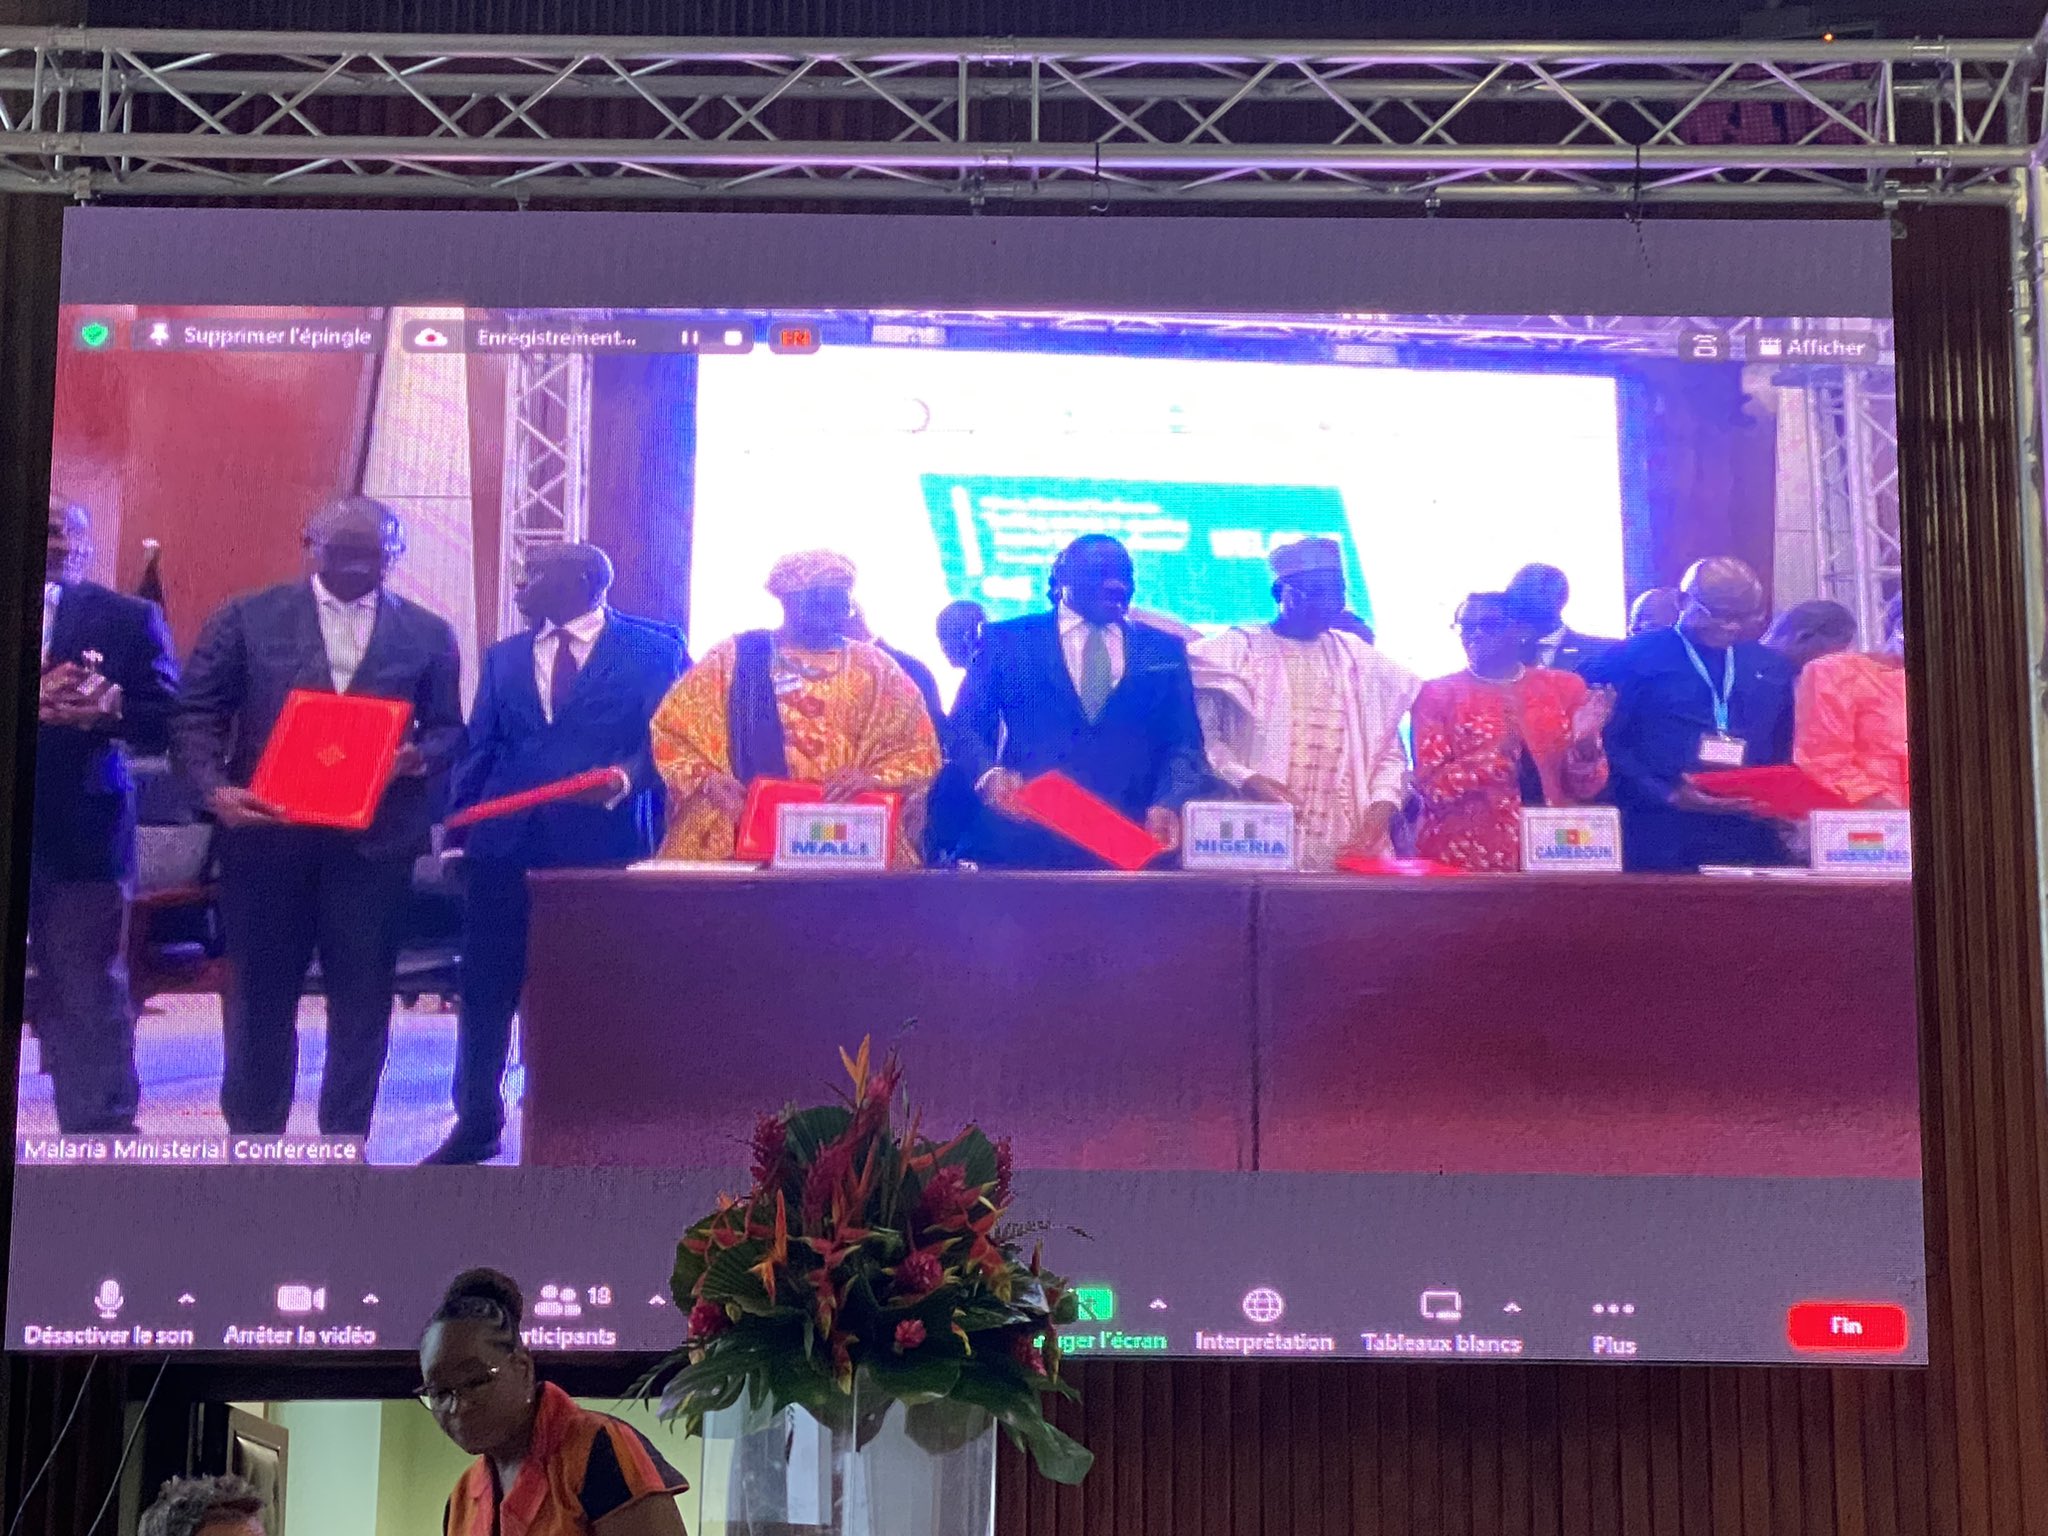 Yaoundé malaria declaration Minister of State for Health and Social Welfare, Dr. Tunji Alausa, and other health ministers from African countries at the Ministerial Conference for countries with High Burden to High Impact (HBHI) in Yaoundé, Cameroun